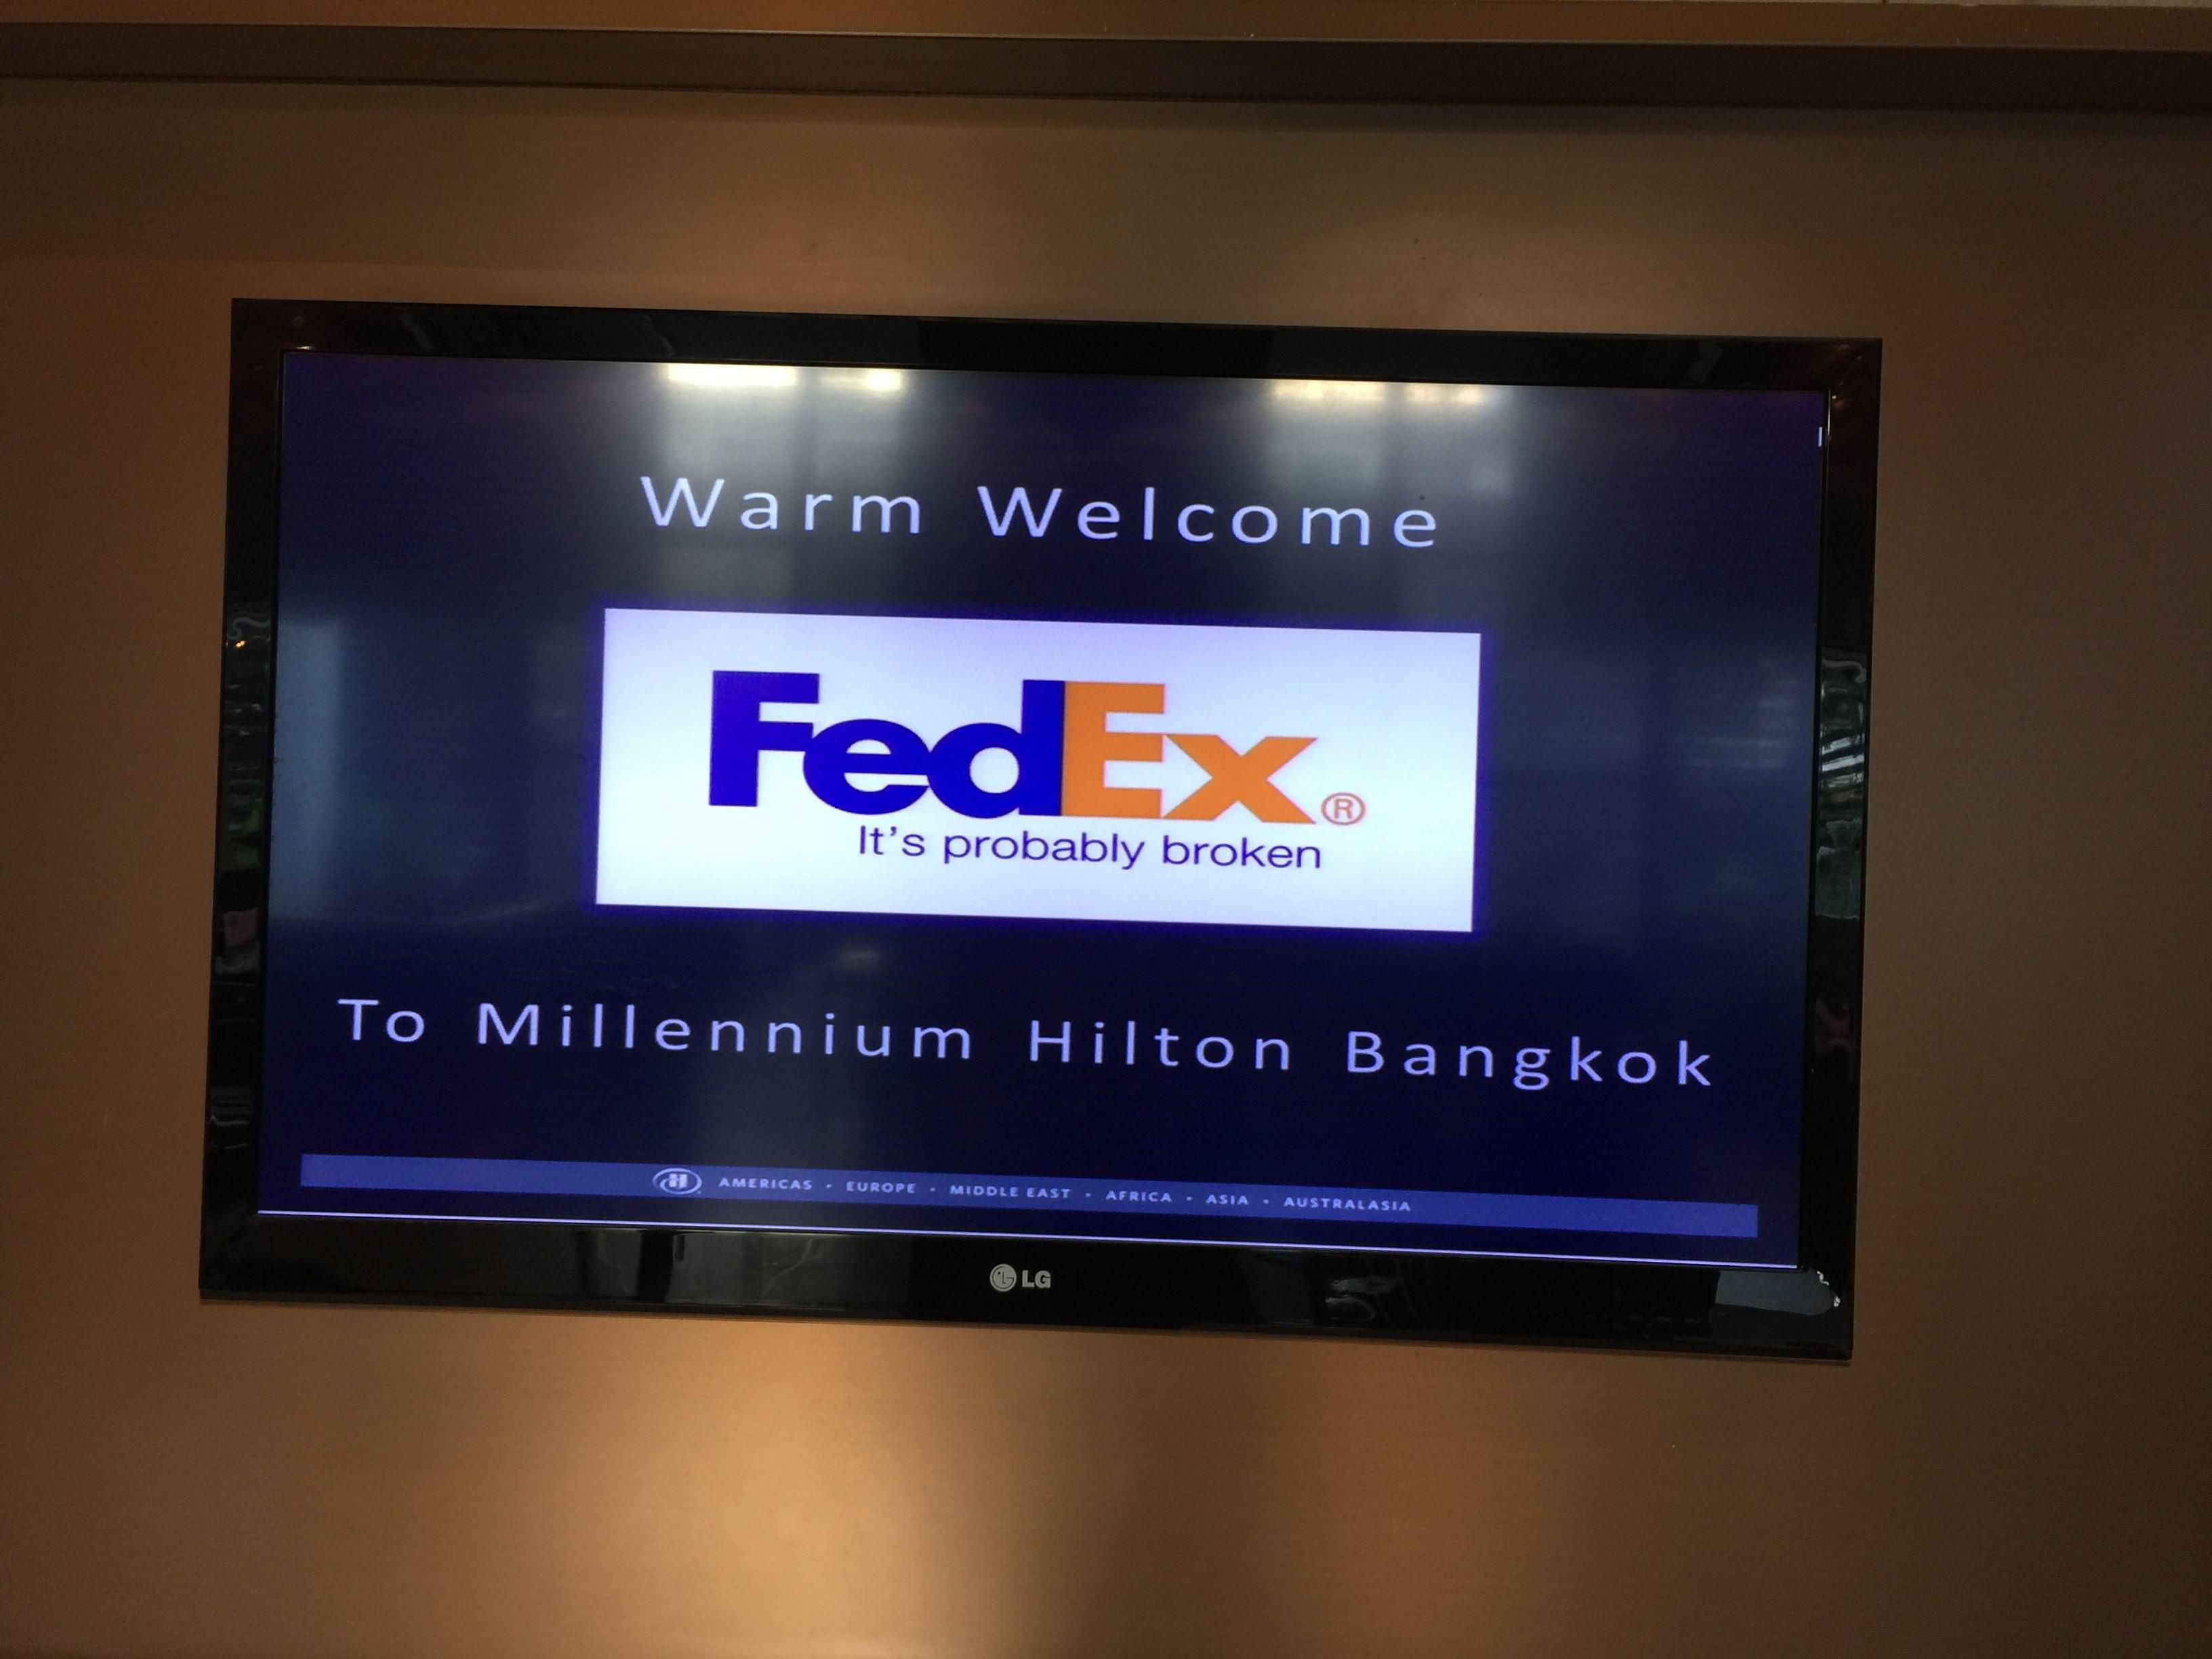 "We need to show we're sponsored by FedEx." "No prob. I'll grab something off the Internet." -- Seen at the Millennium Hilton, Bangkok